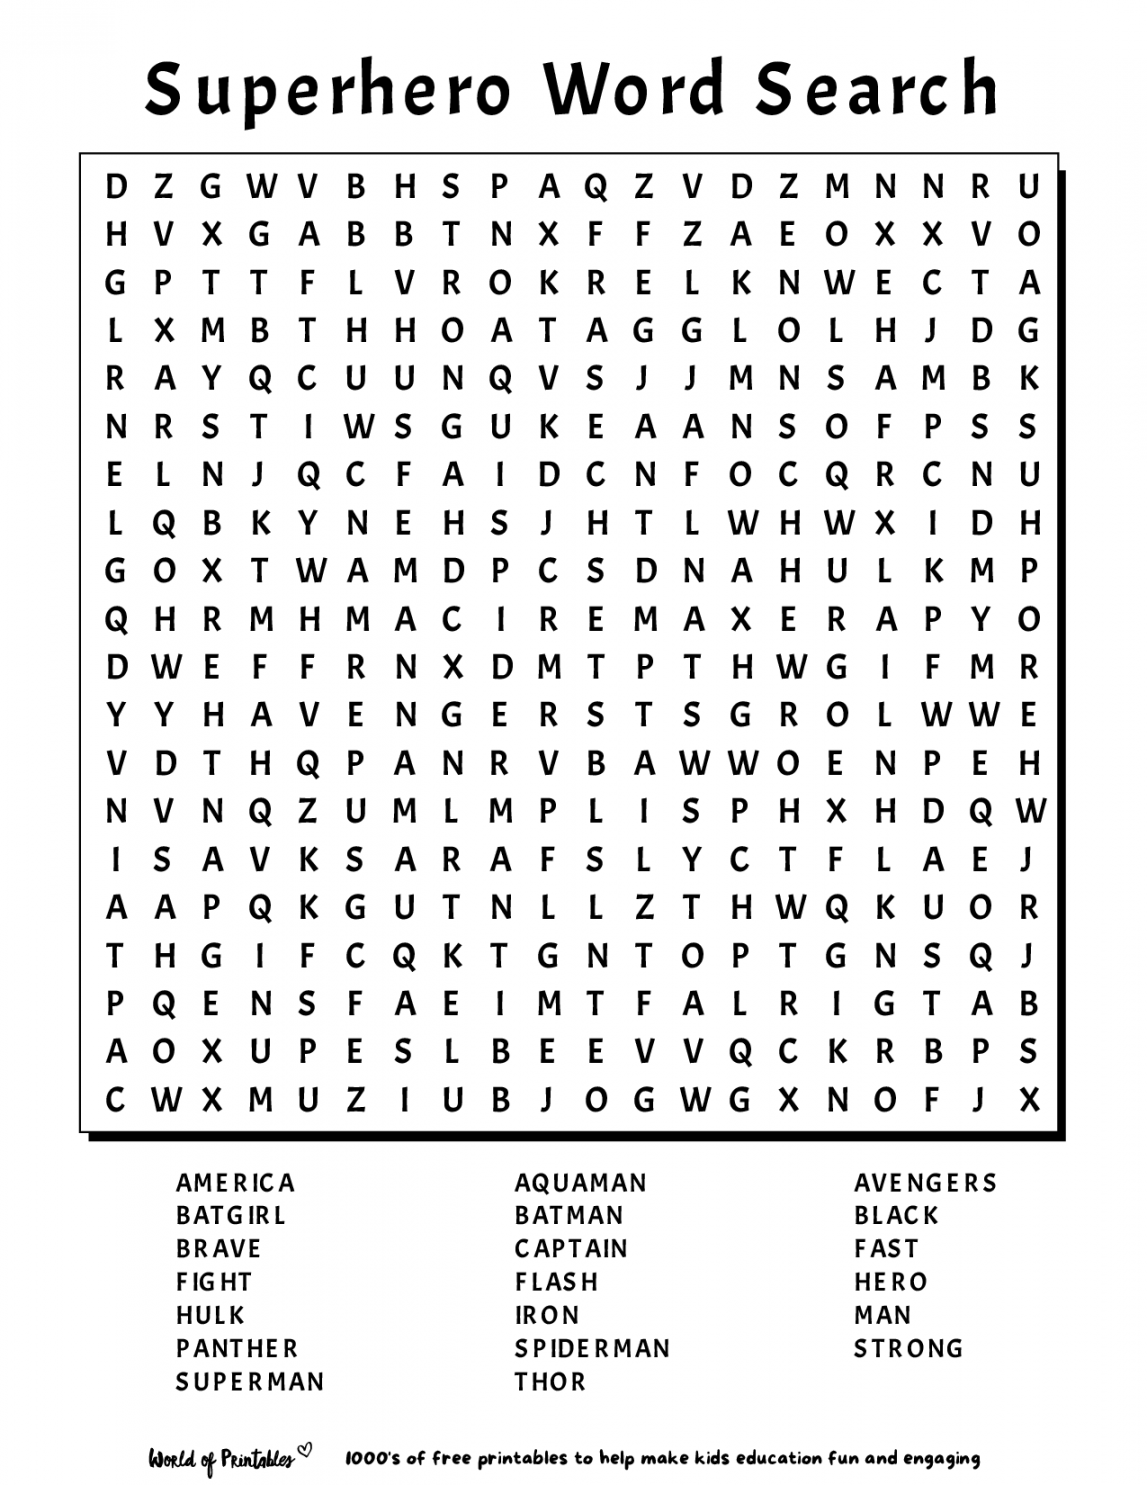 Free Printable Word Search Puzzles - Printable - Printable Word Search  World of Printables